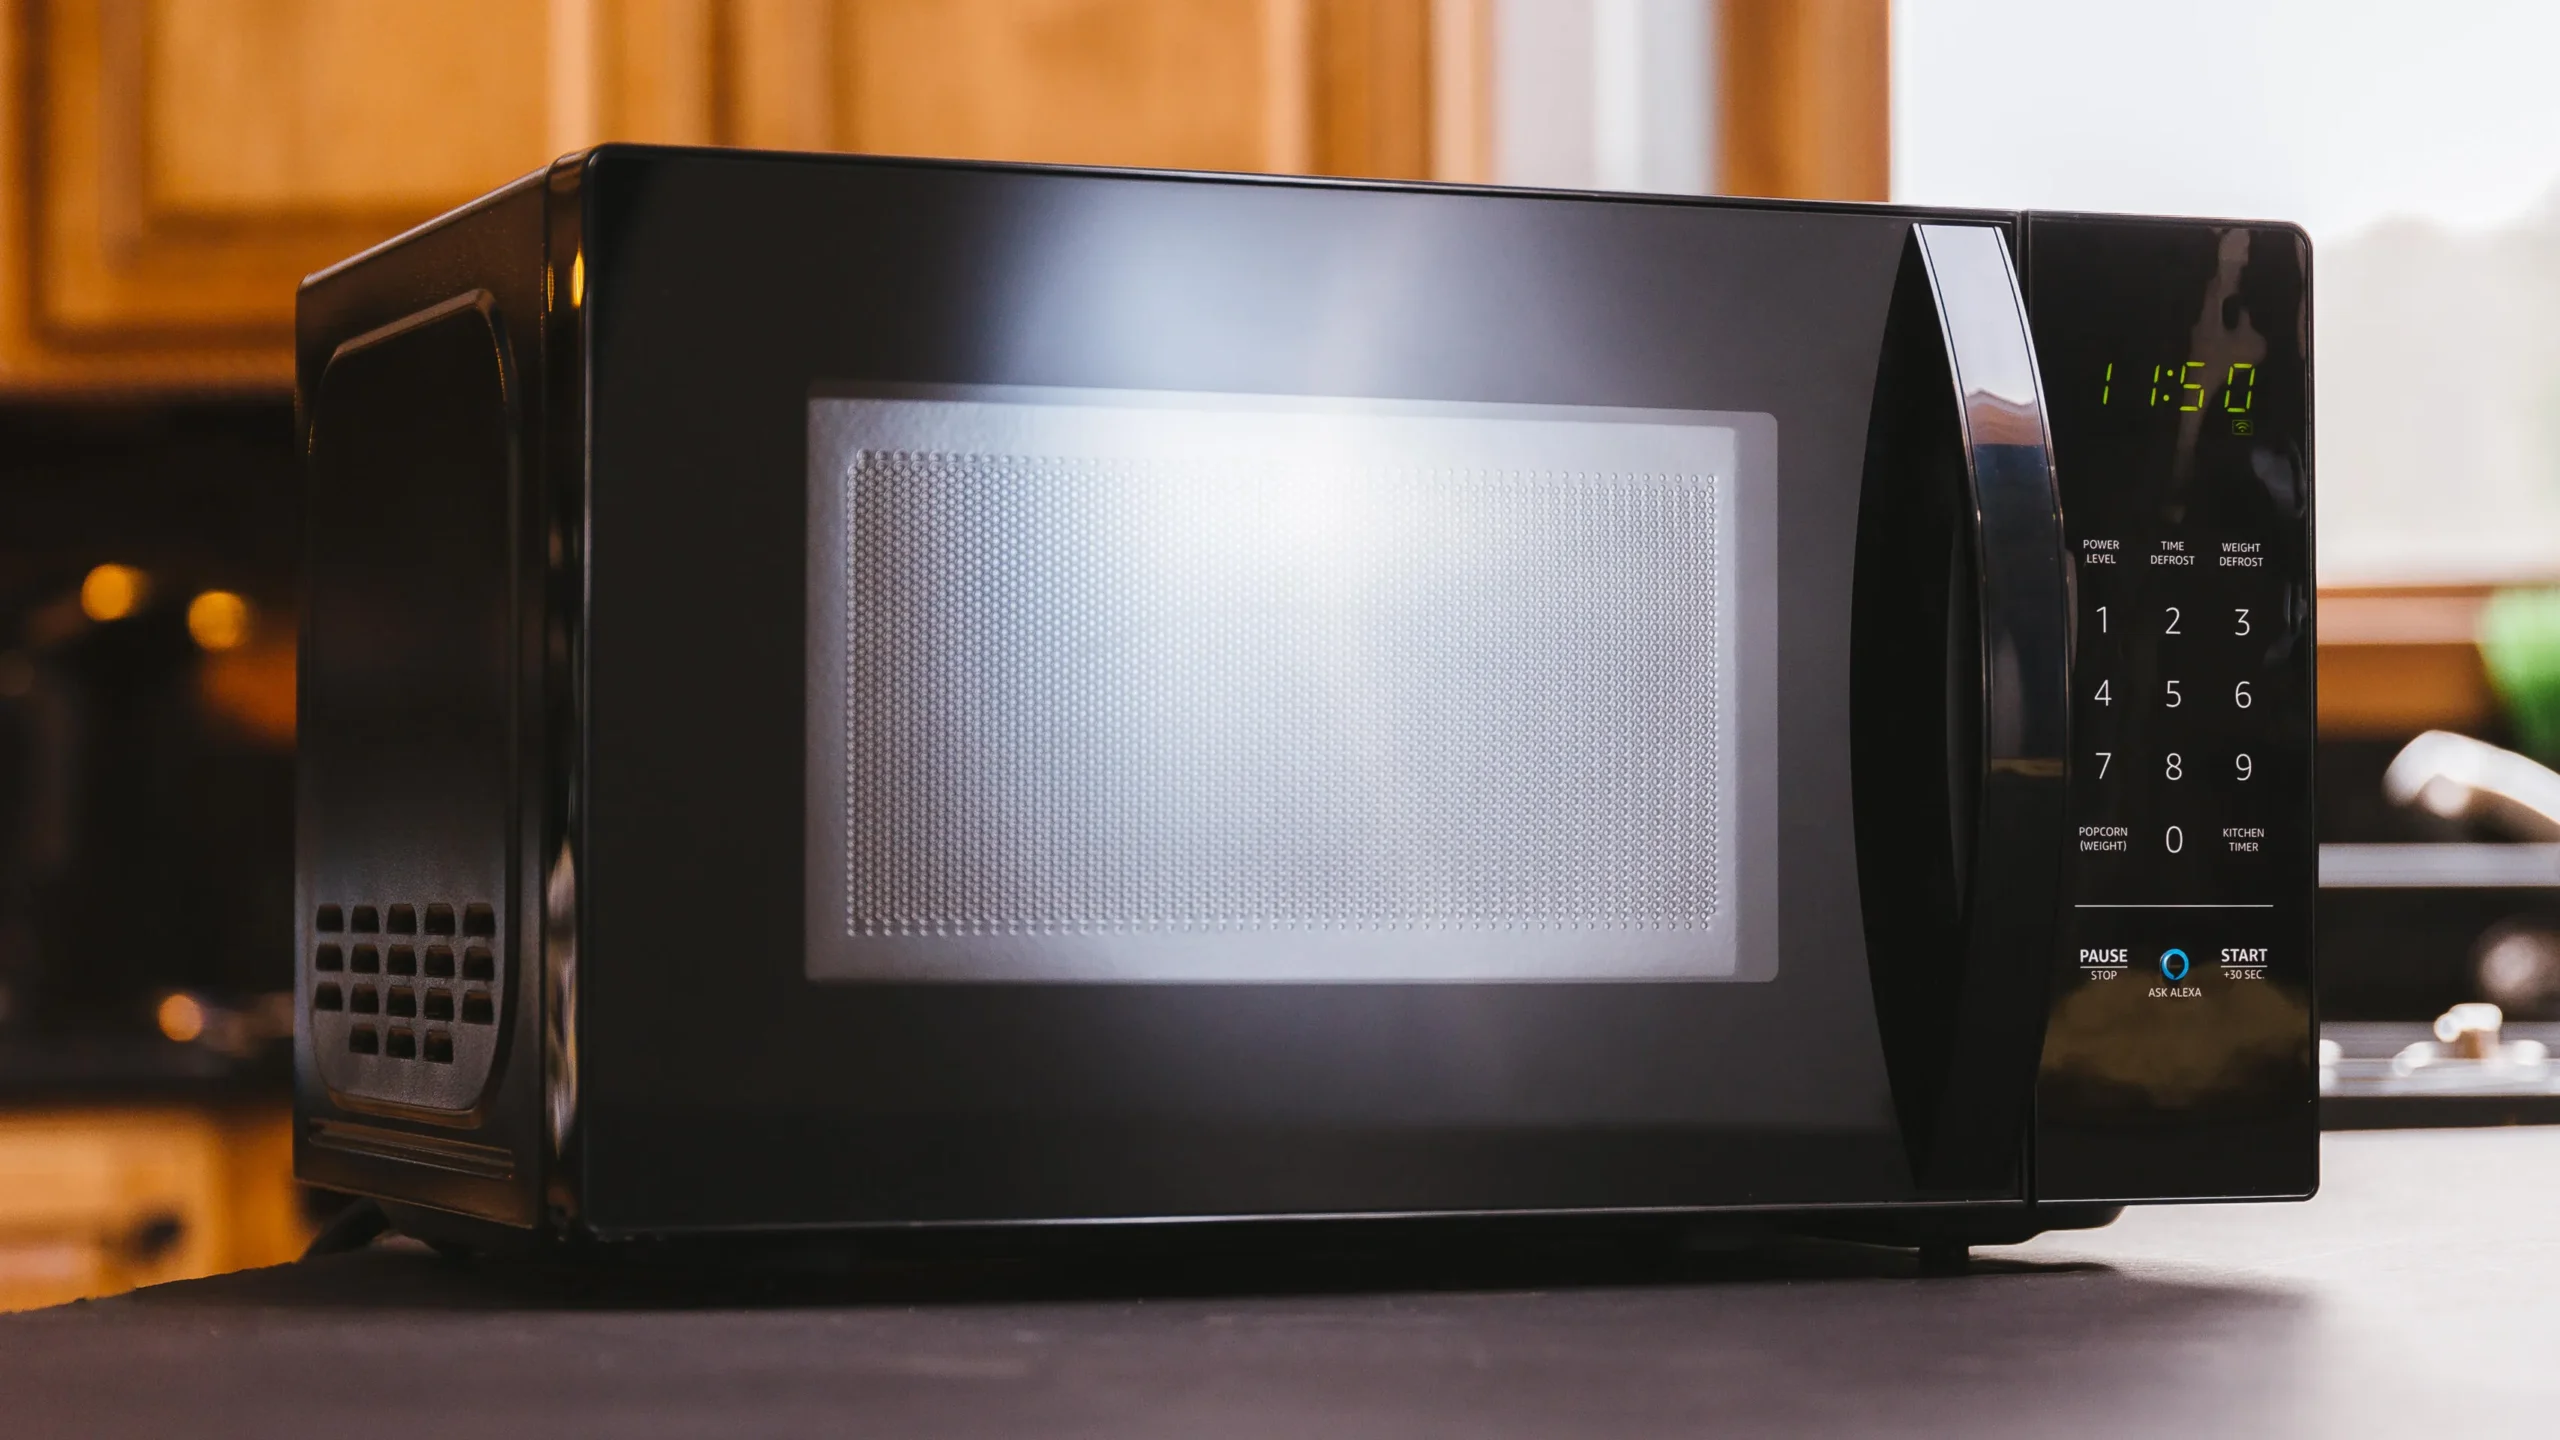 What Happens if a Microwave Gets Wet?